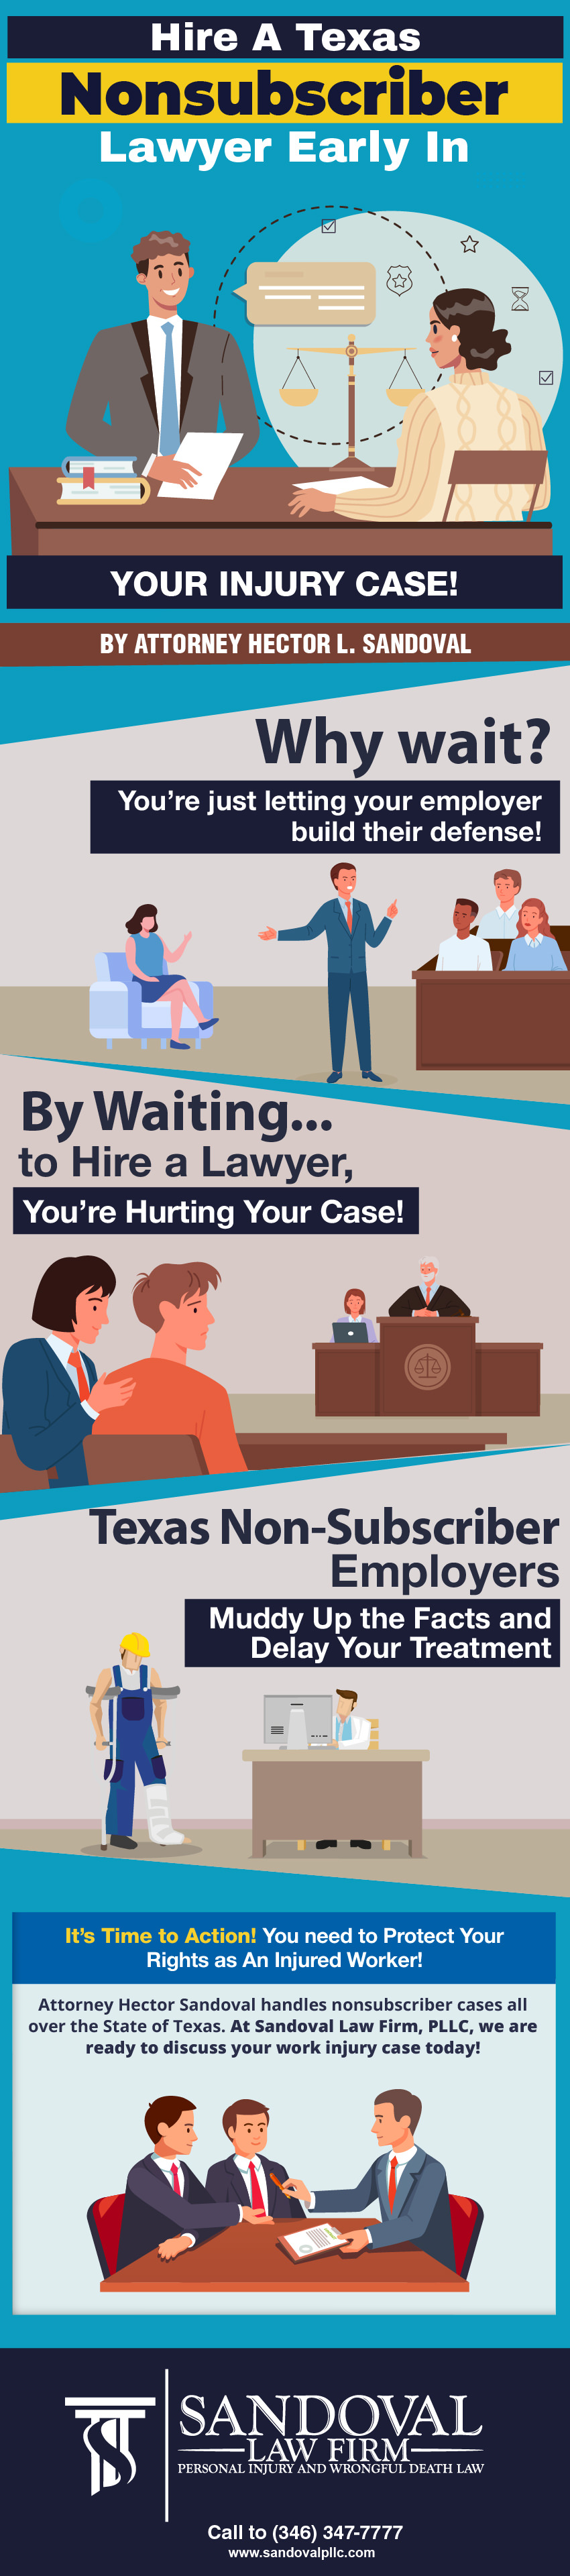 Hire A Texas Nonsubscriber Lawyer Early In Your Injury Case!